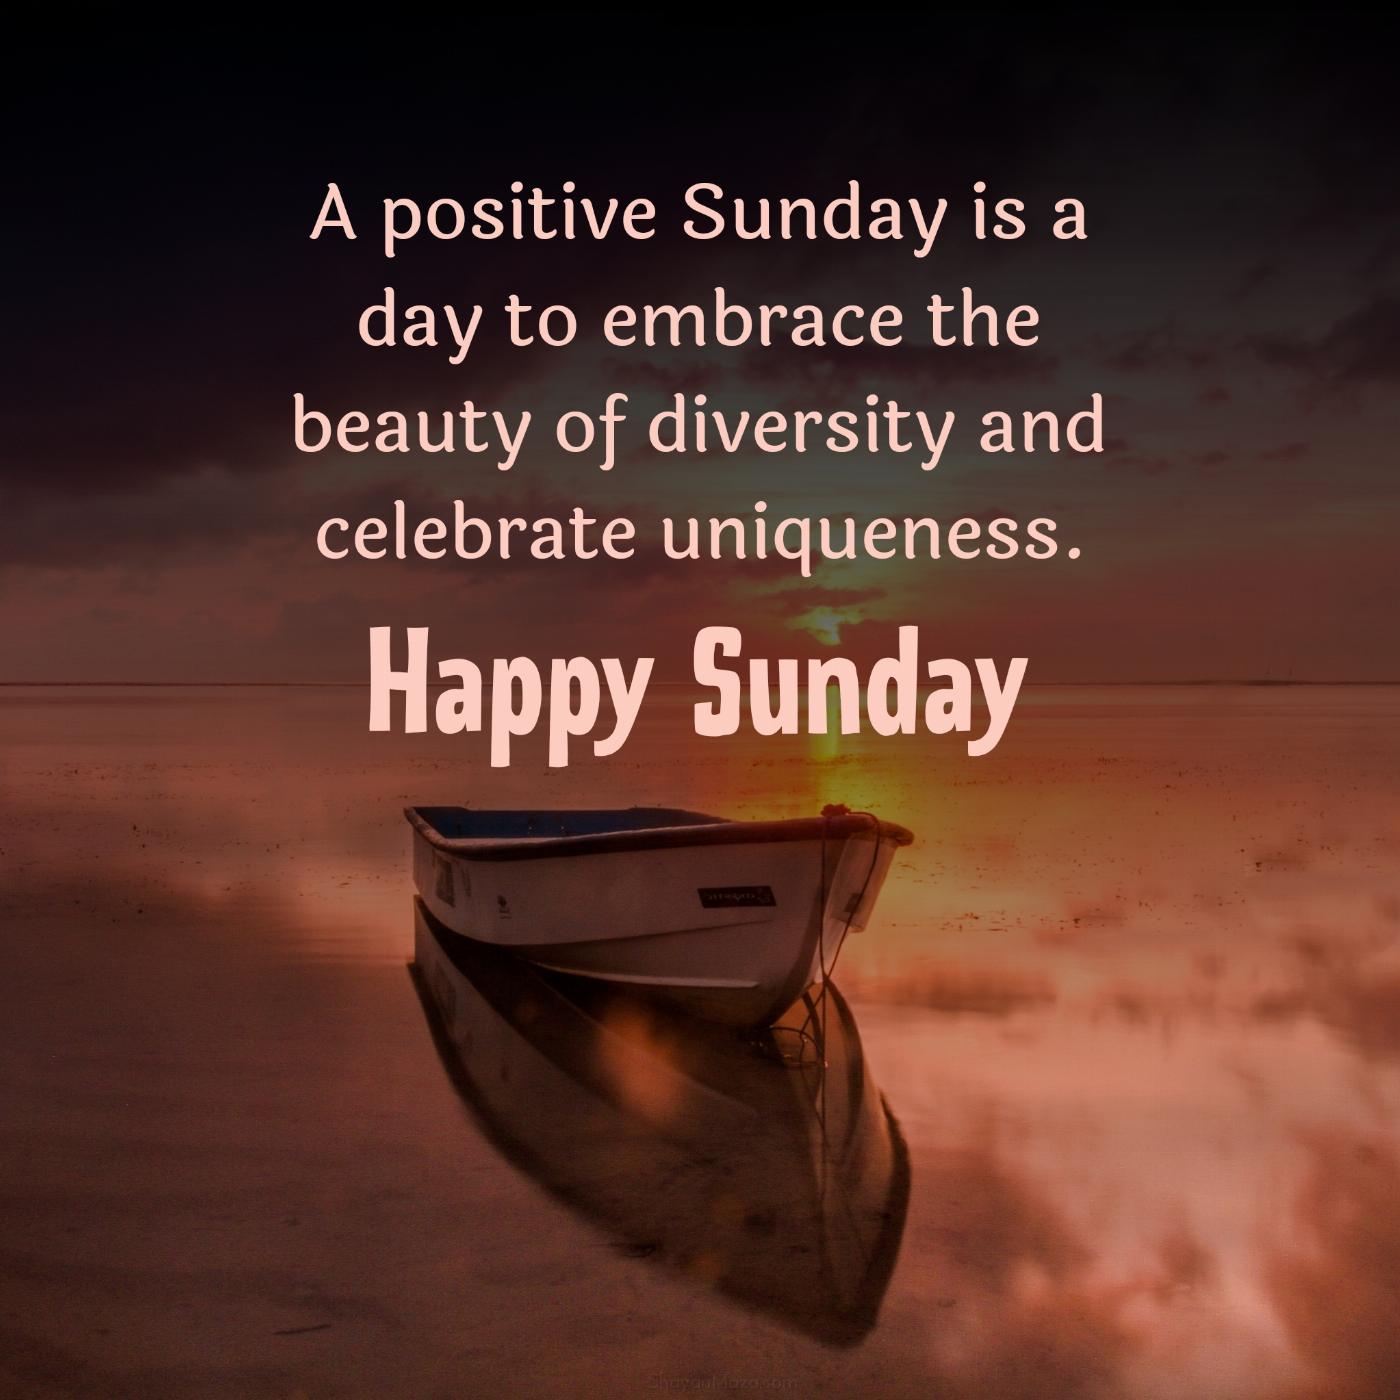 A positive Sunday is a day to embrace the beauty of diversity